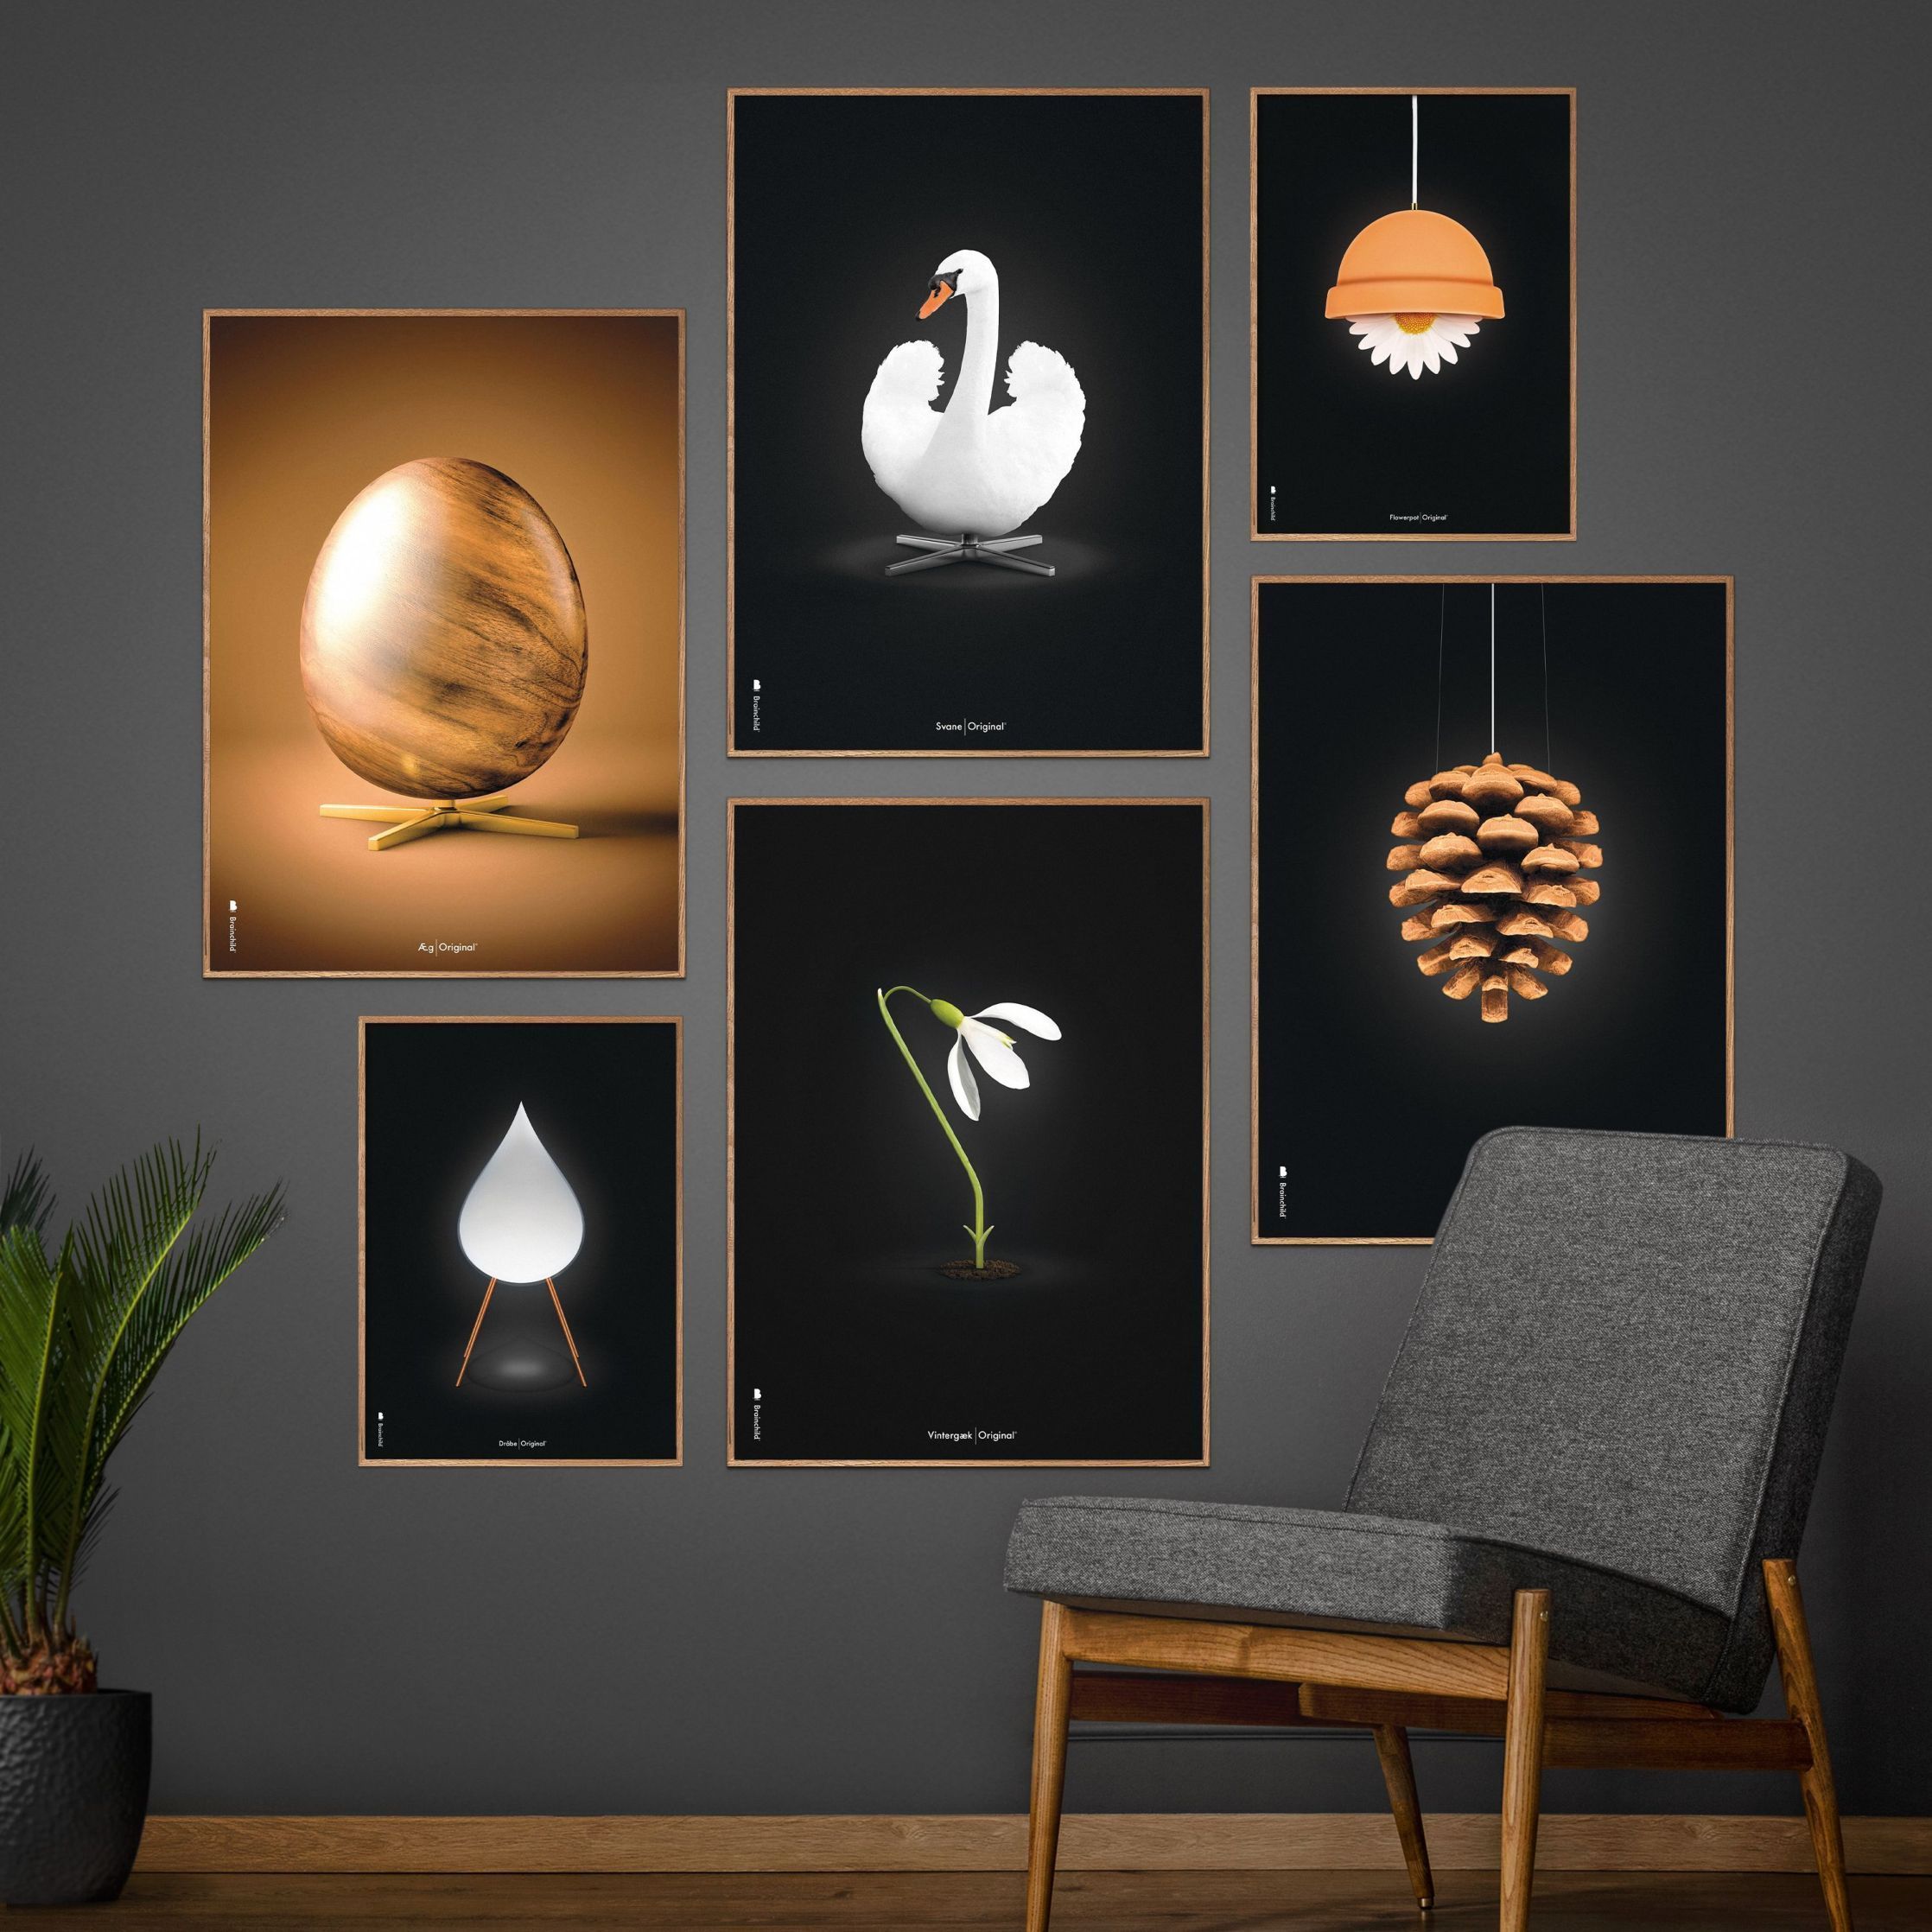 Brainchild Swan Classic Poster, Frame In Black Lacquered Wood 30x40 Cm, White/White Background